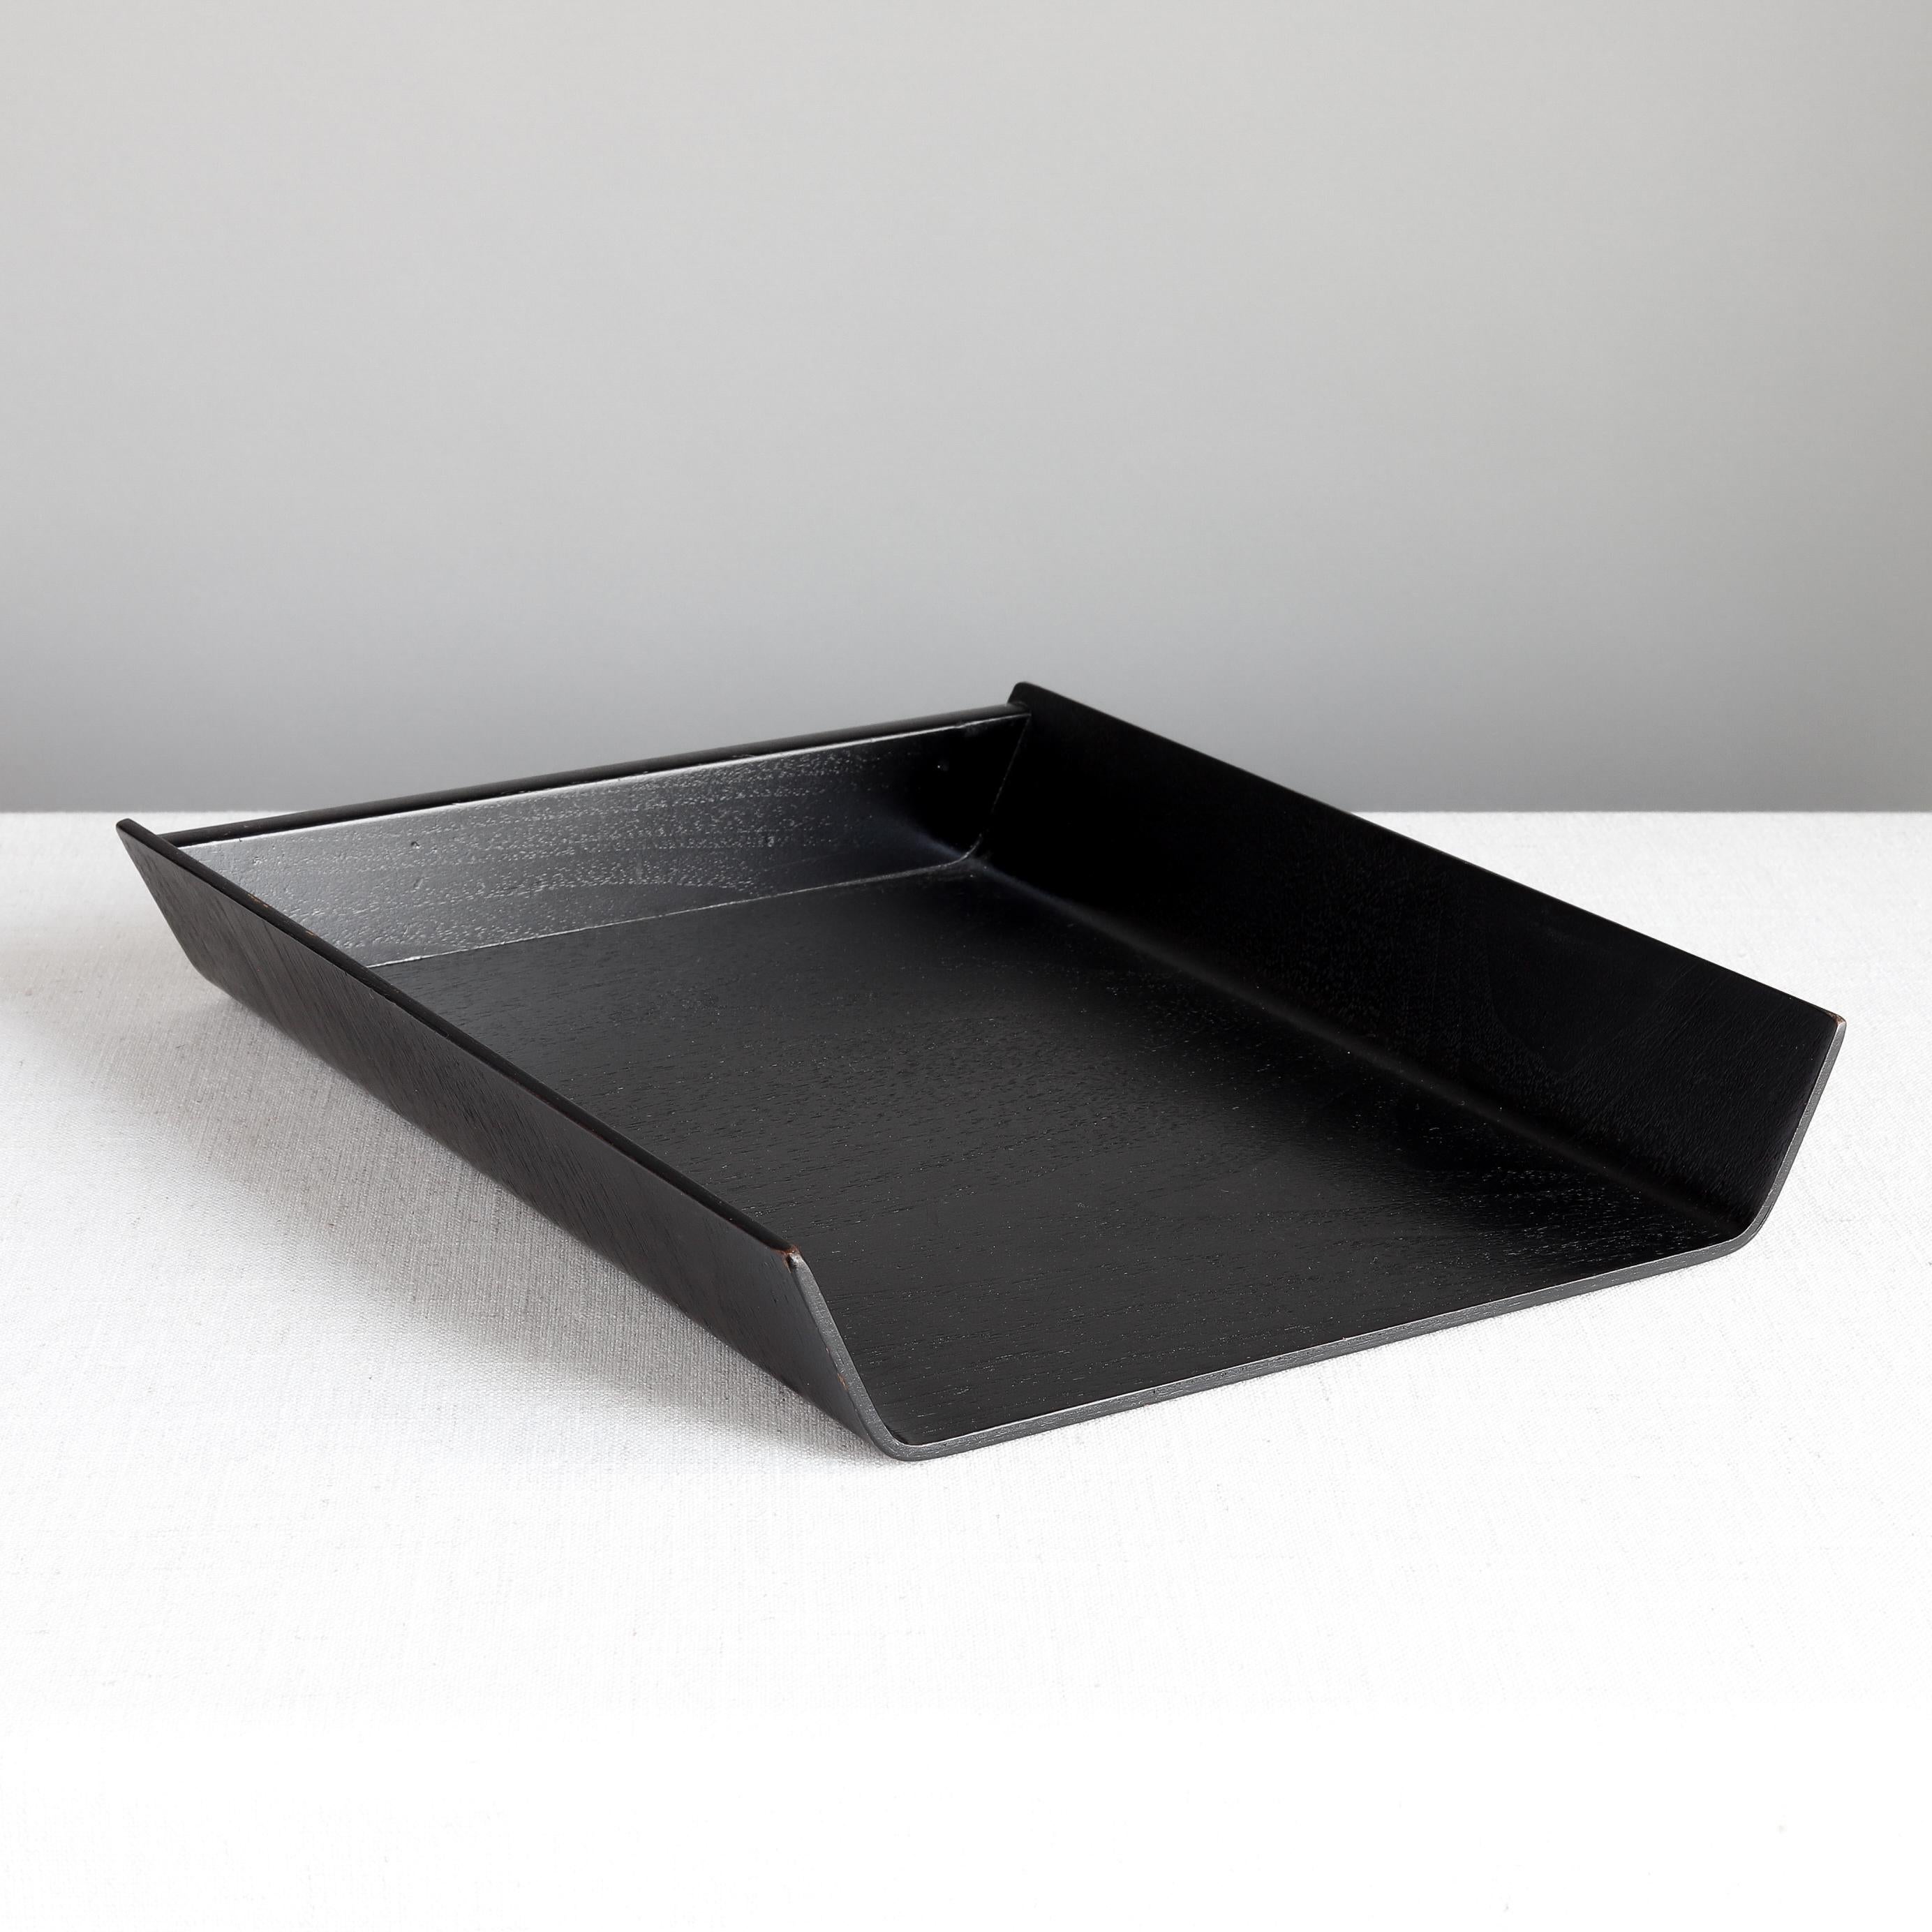 American Florence Knoll Black Birch Plywood Letter Tray, Office Desk Accessory